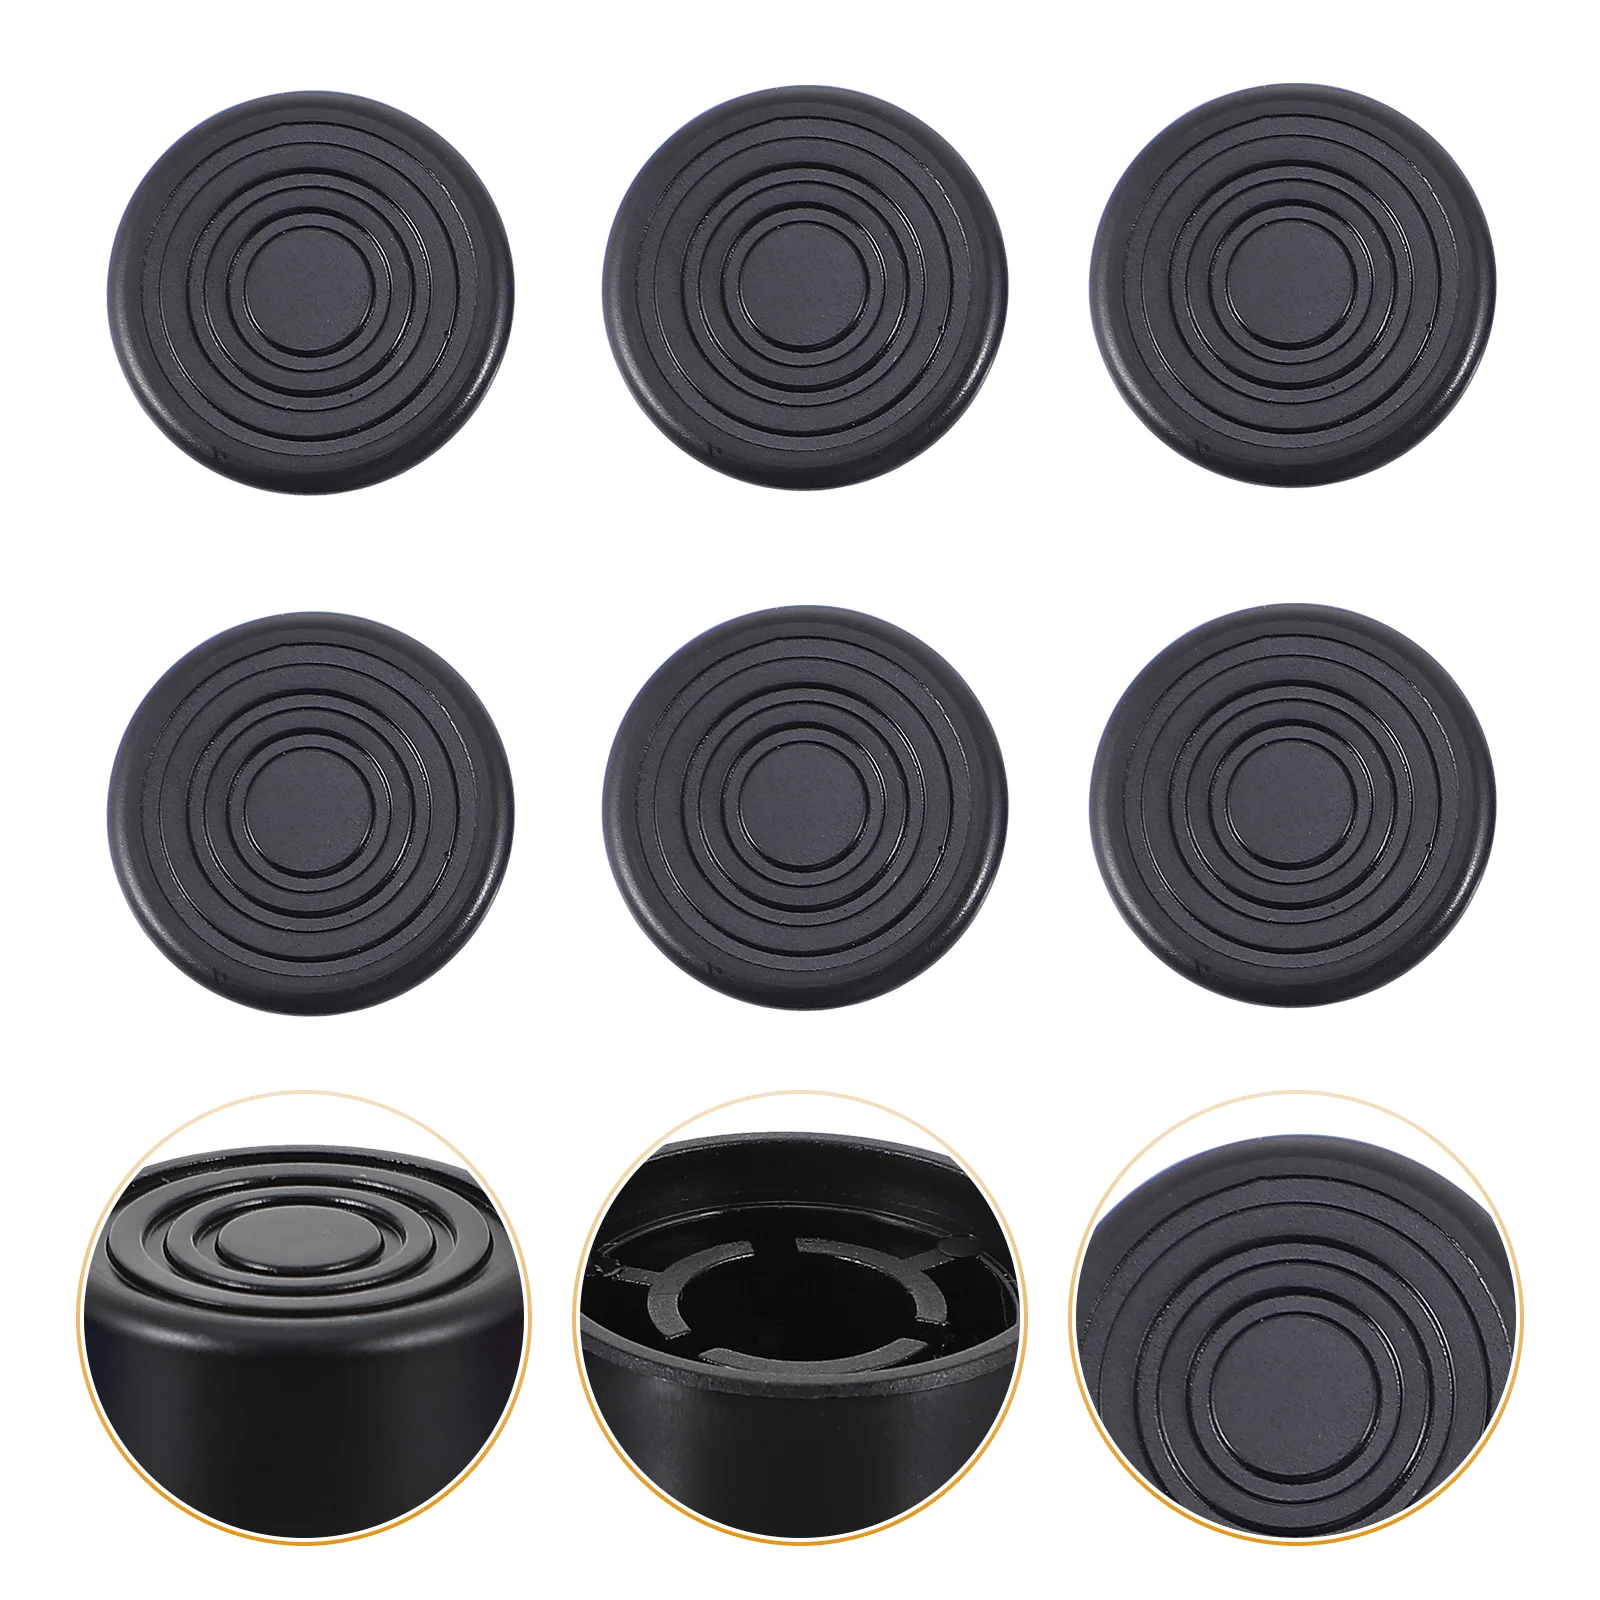 

6 Pcs Guitar Knob Black Knobs Protective Pedal Switch Caps Effect Footswitch Toppers Effector Plastic